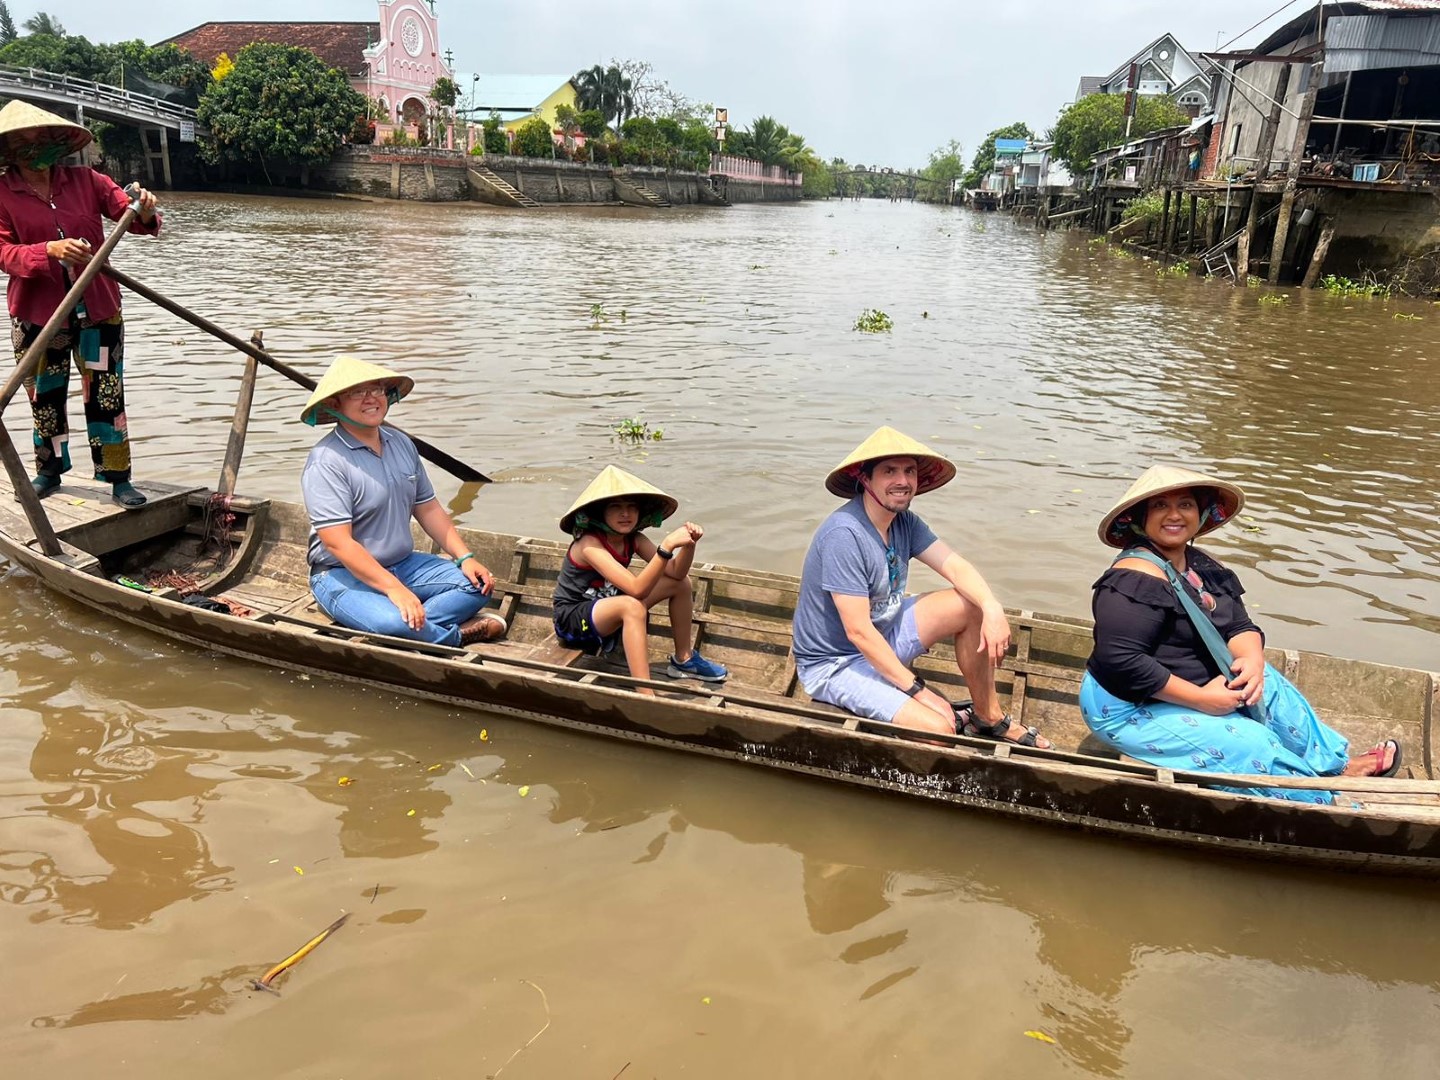 Family on a boat in the Mekong Delta